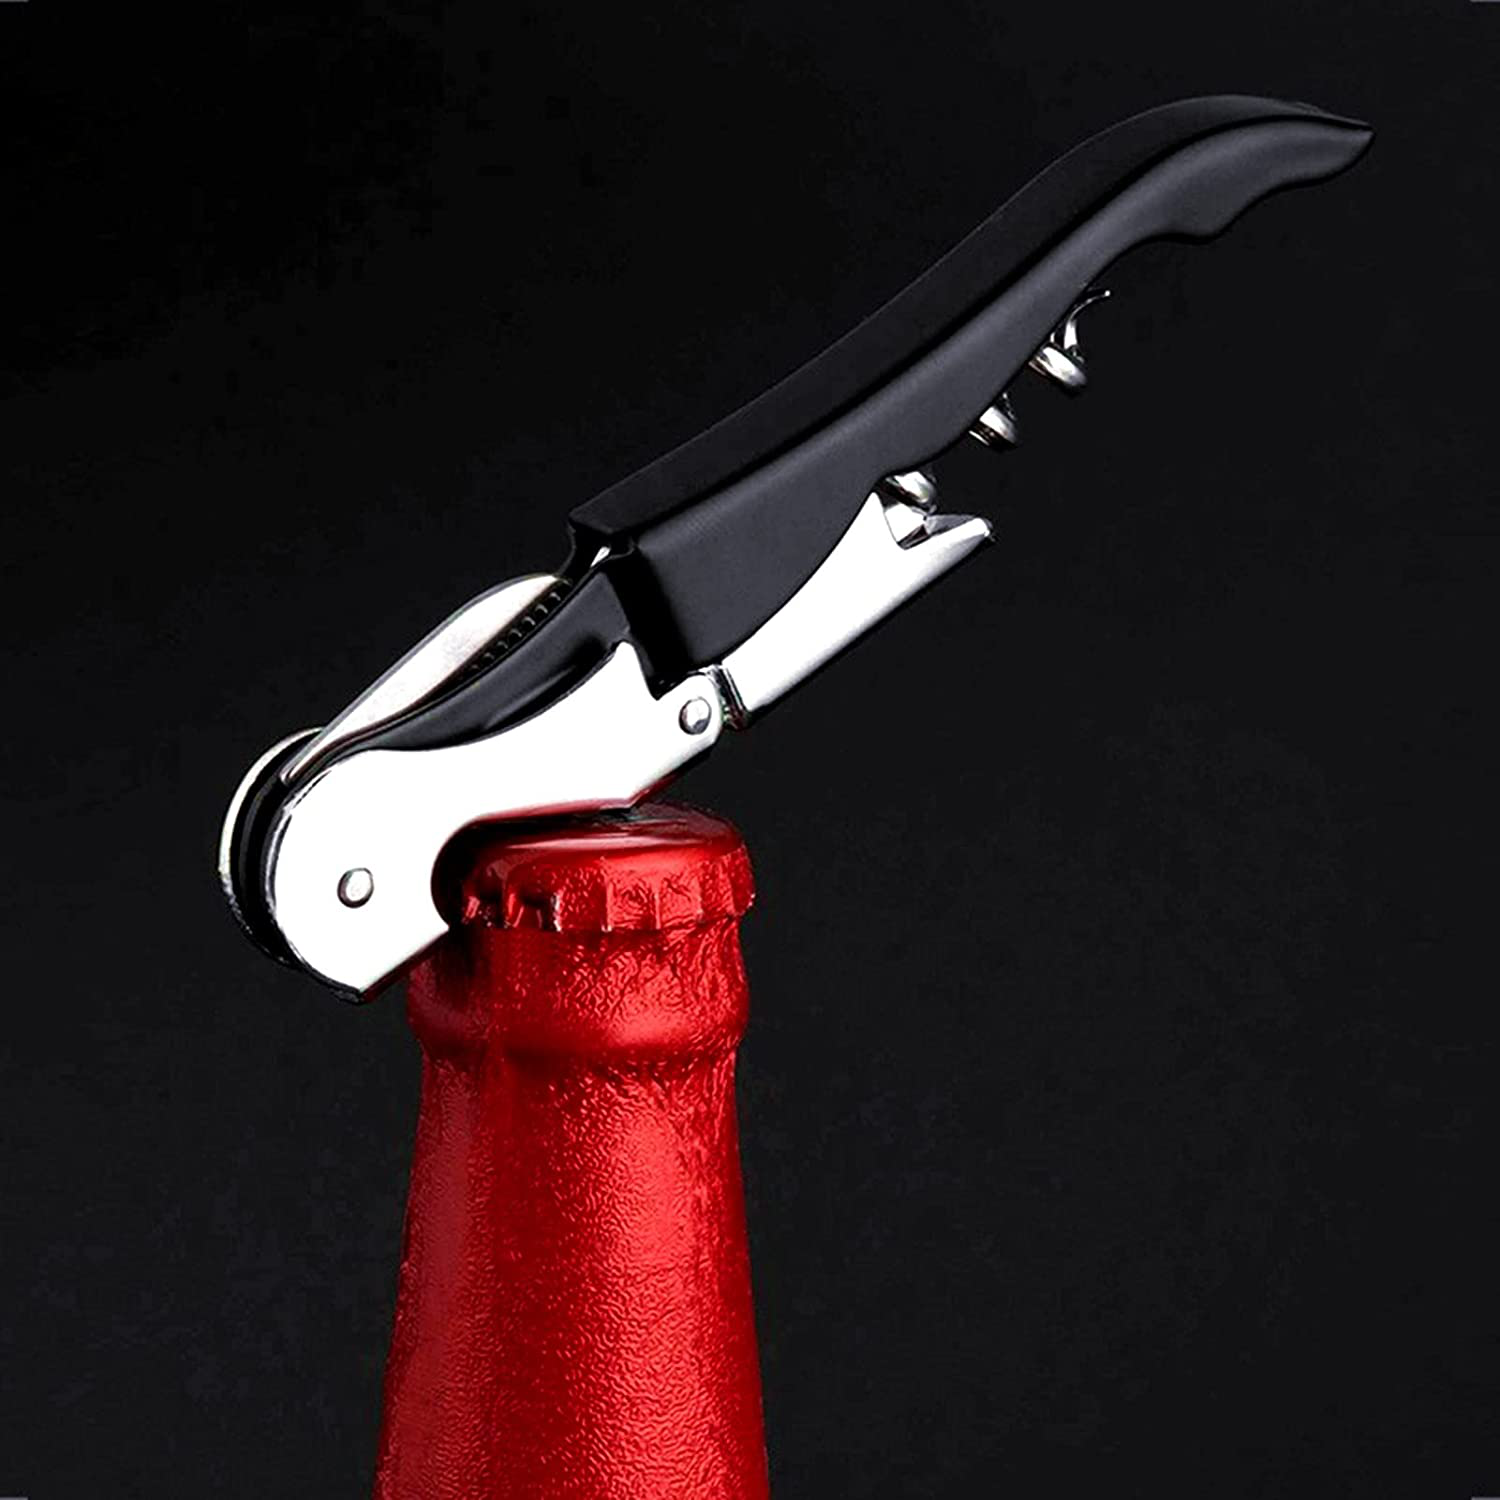 Aoineeseo Waiter Corkscrew, Wine Opener with Serrated Foil Cutter (Red, 2 Pack)